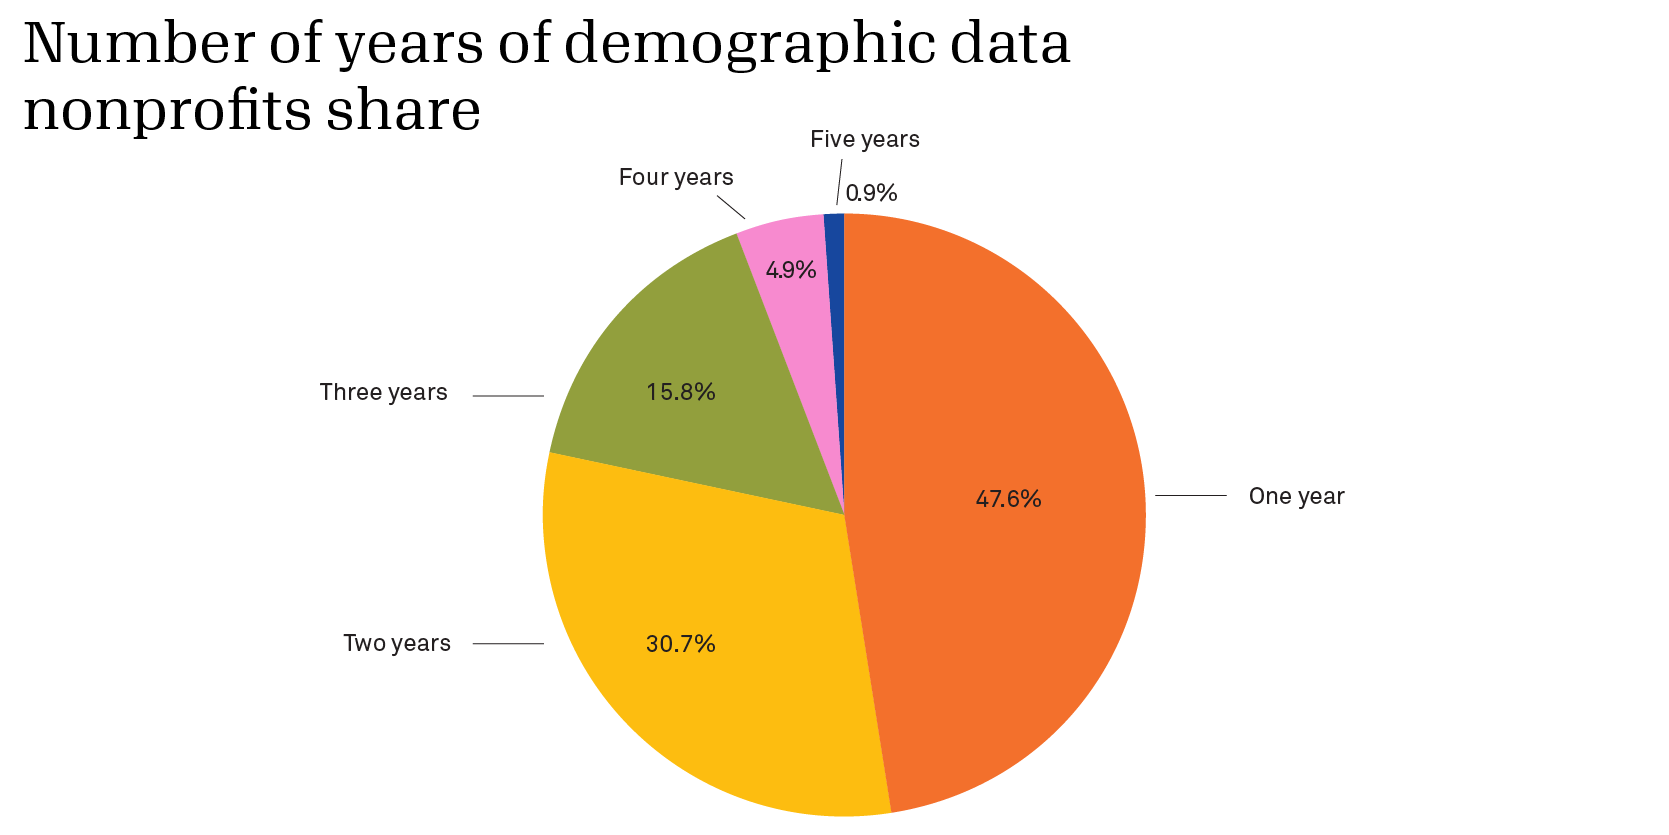 Pie chart with number of years of demographic data nonprofits share. 47.6% share one year, 30.7% share two years, 15.8% share three years, 4.9% share four years, 0.9% share five years. 